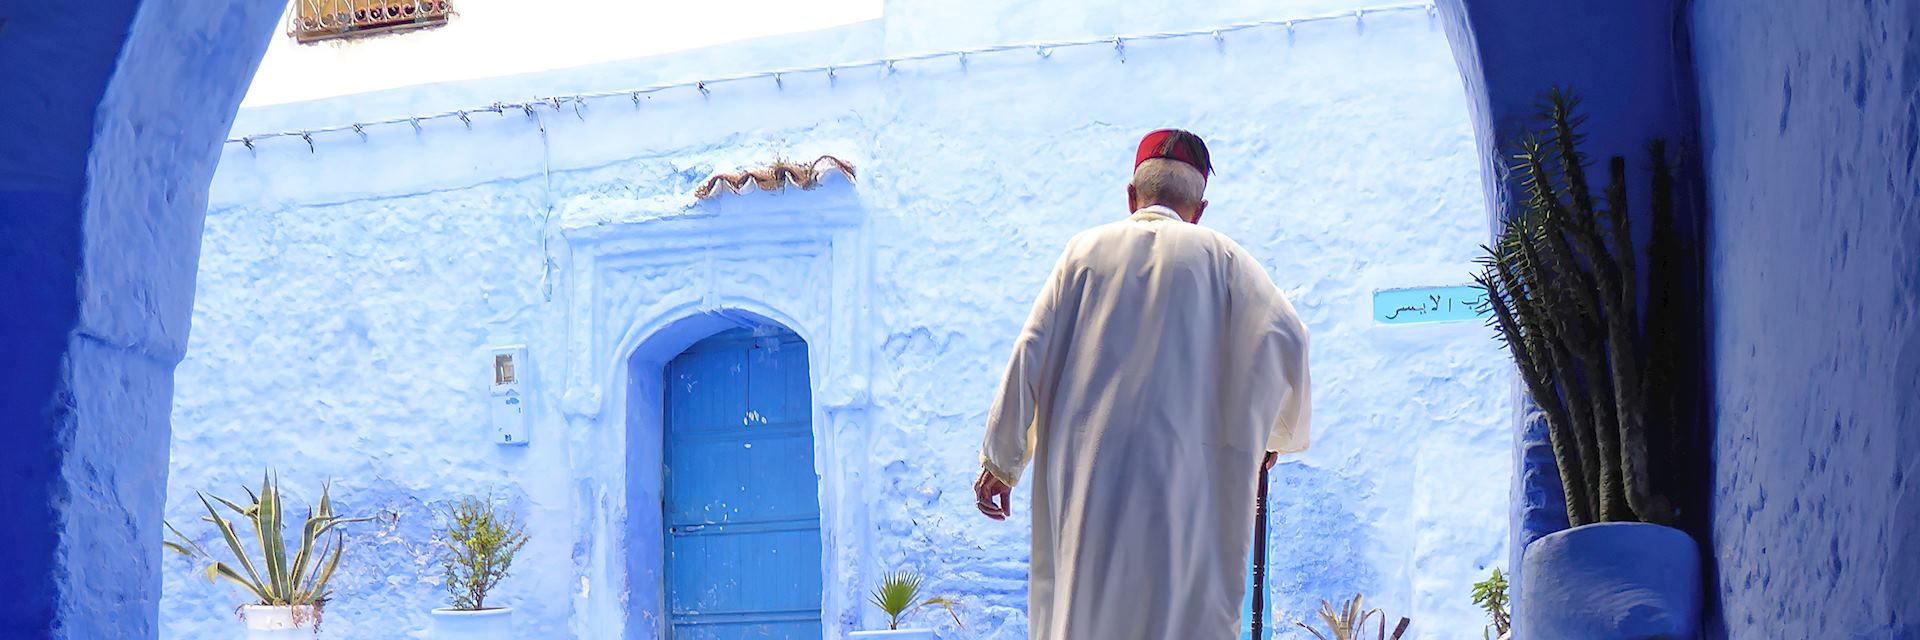 Old man in Chefchaouen